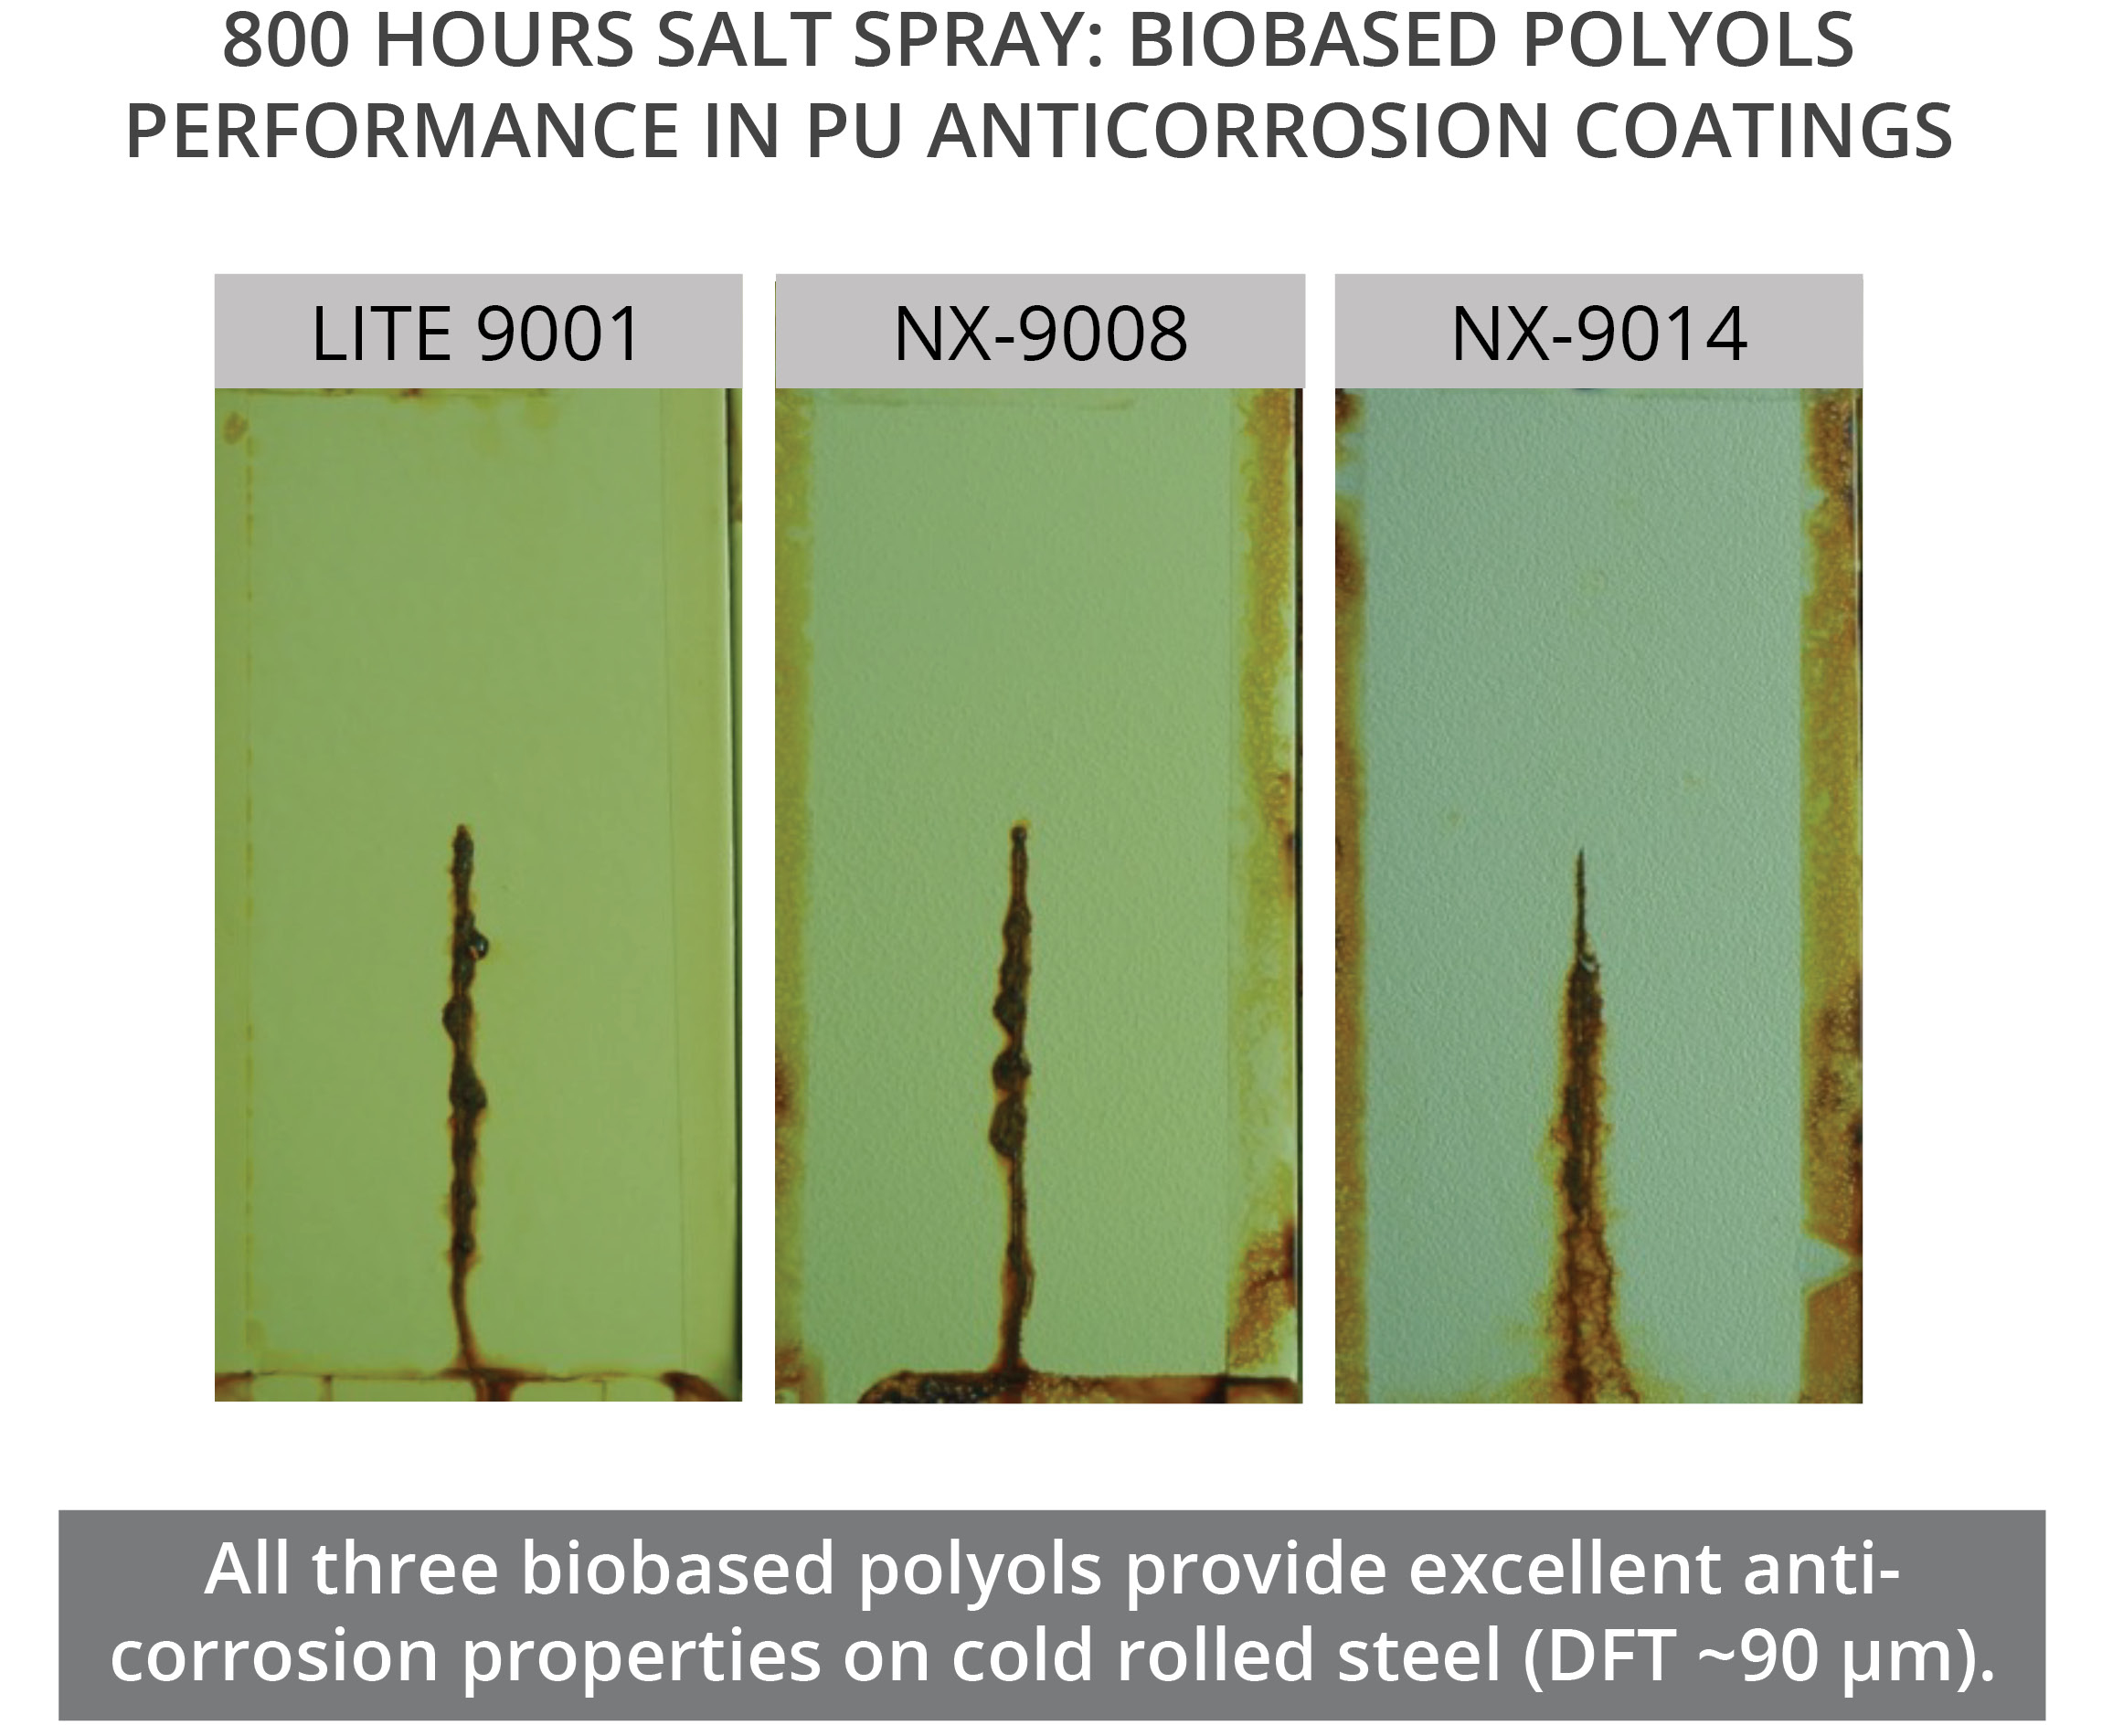 Cardolite biobased polyols deliver good corrosion protection, adhesion to metal substrates and flexibility to polyurethane protective coatings